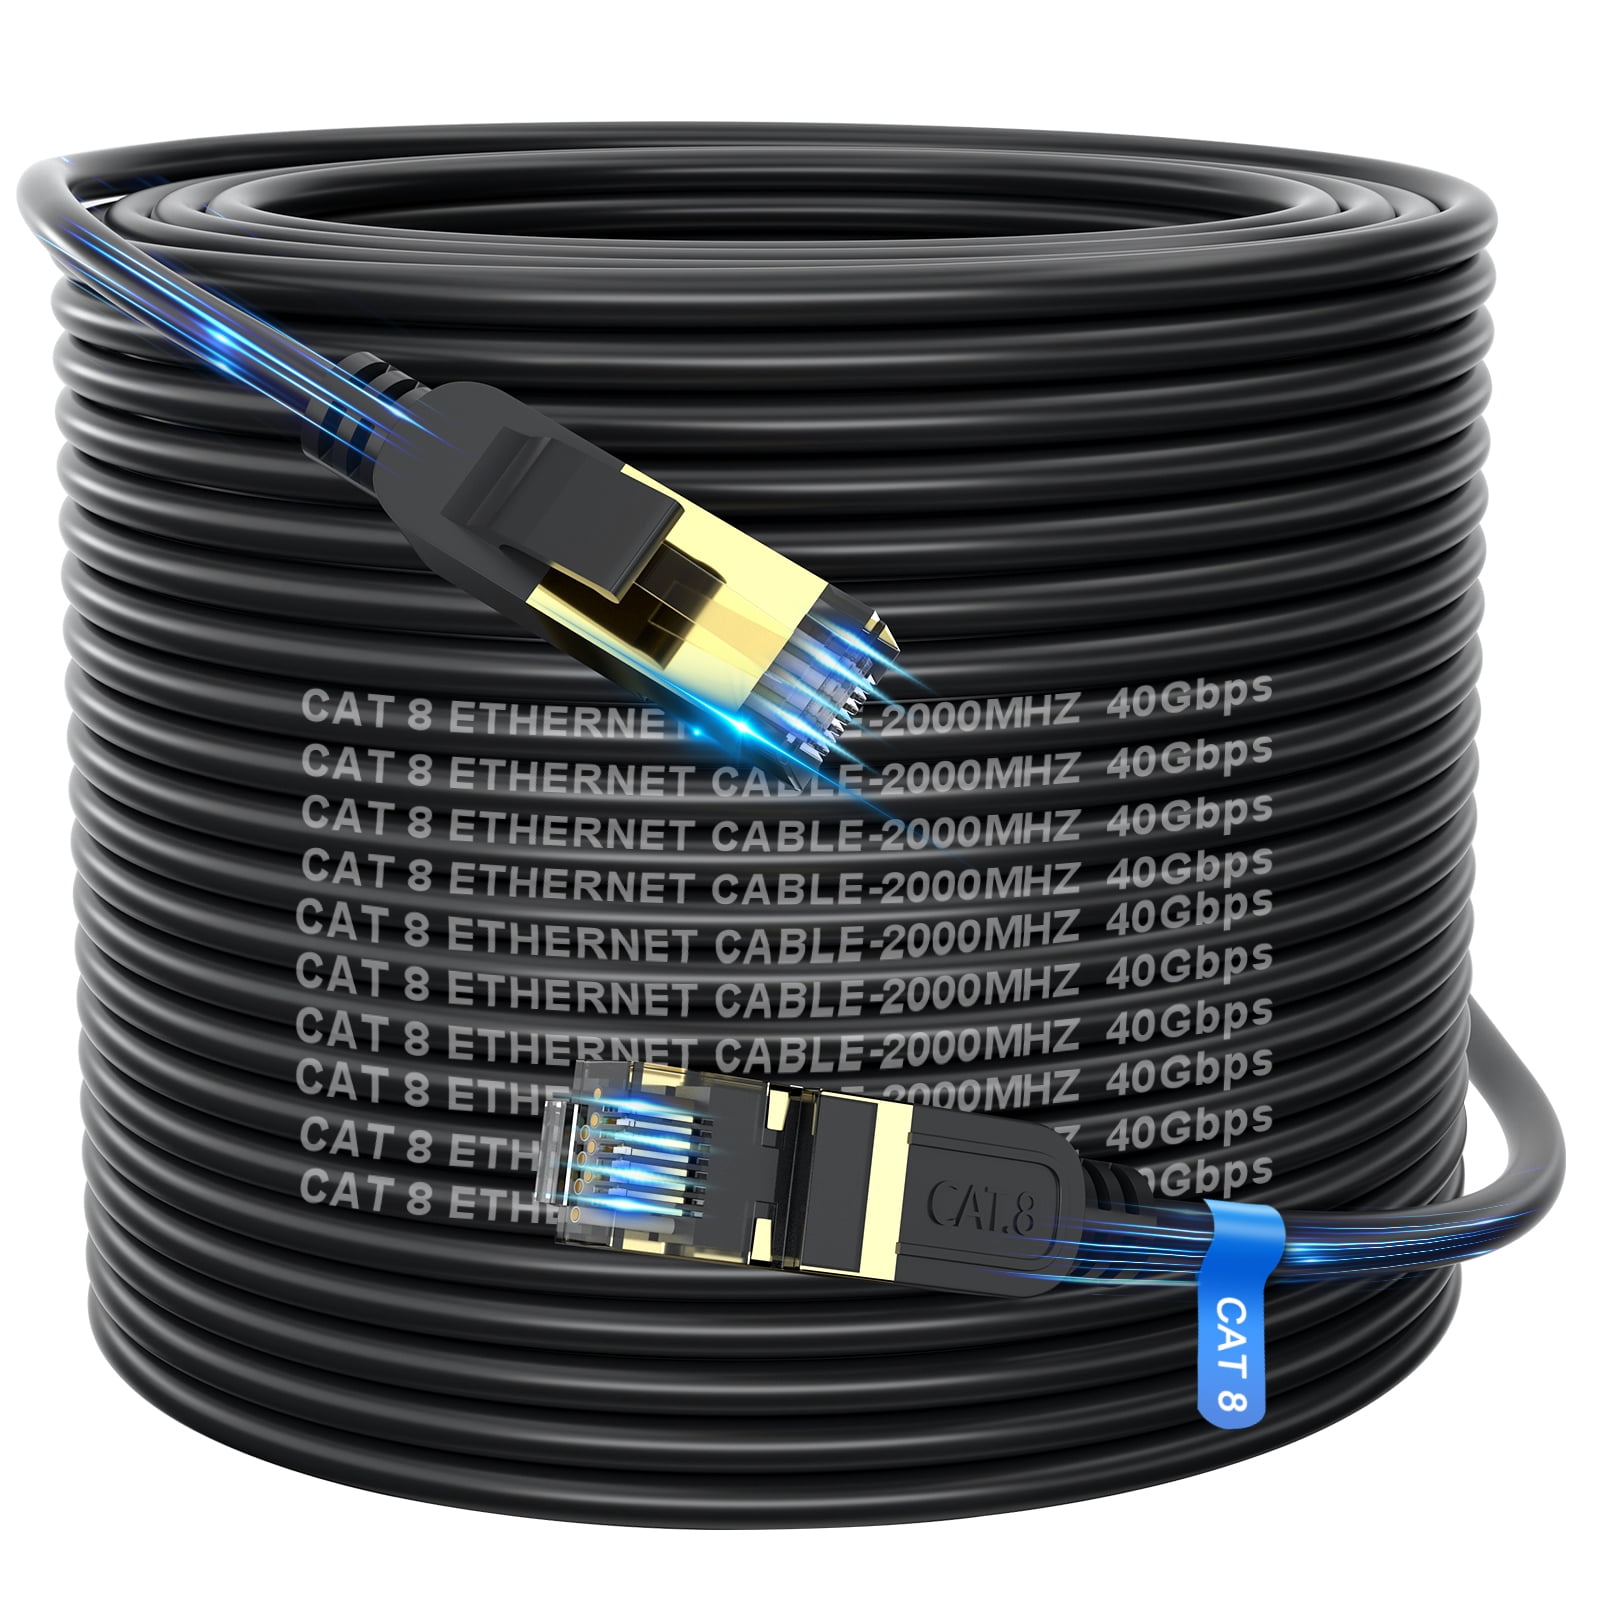 Full Shielding High Purity Pure Silver Core Ethernet Cable Cat 7 Cat 8  40Gbps 2000MHz Speed